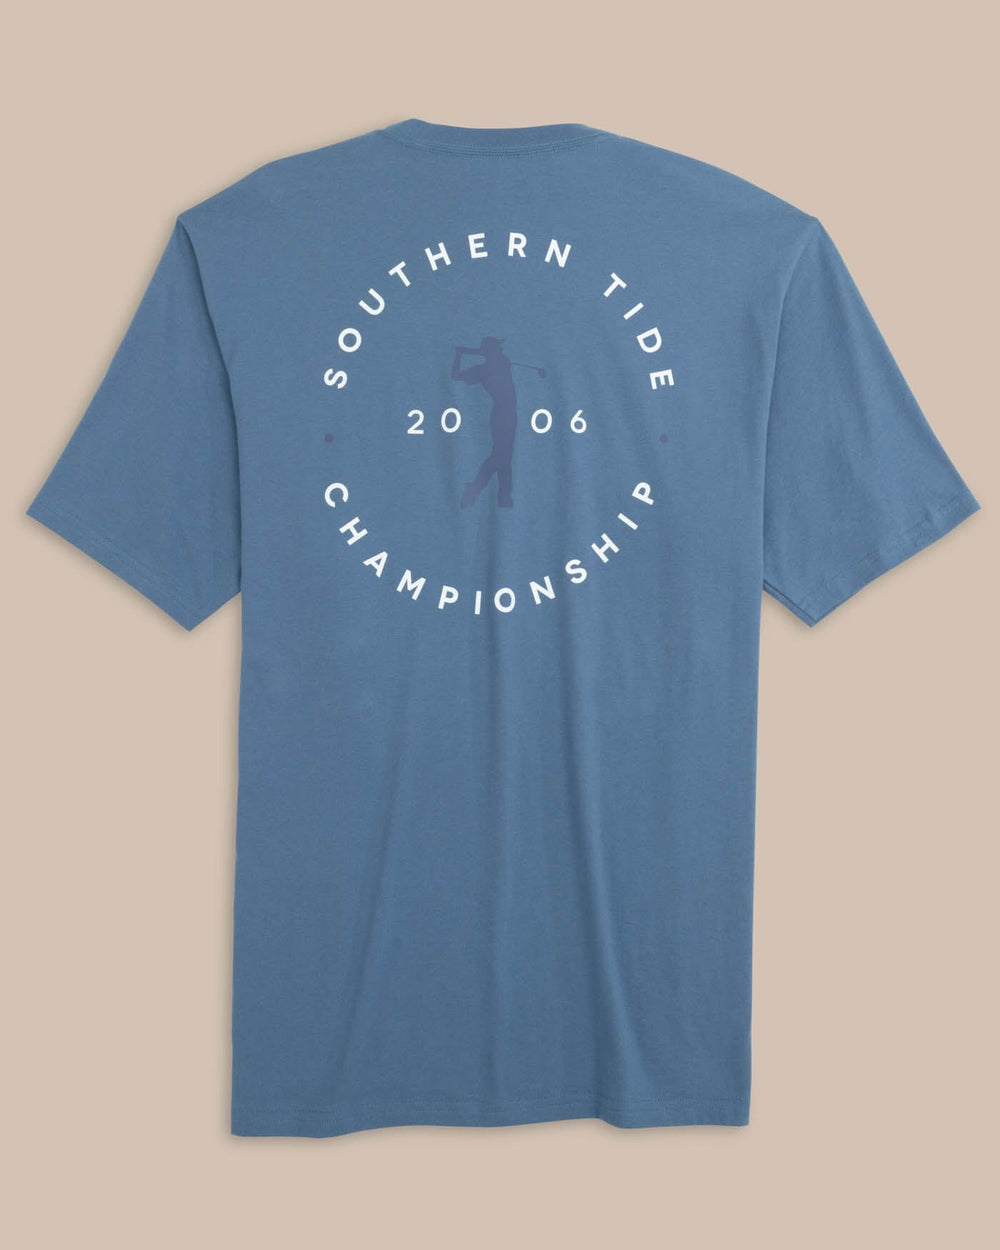 The back view of the Southern Tide ST Championship Short Sleeve T-Shirt by Southern Tide - Coronet Blue